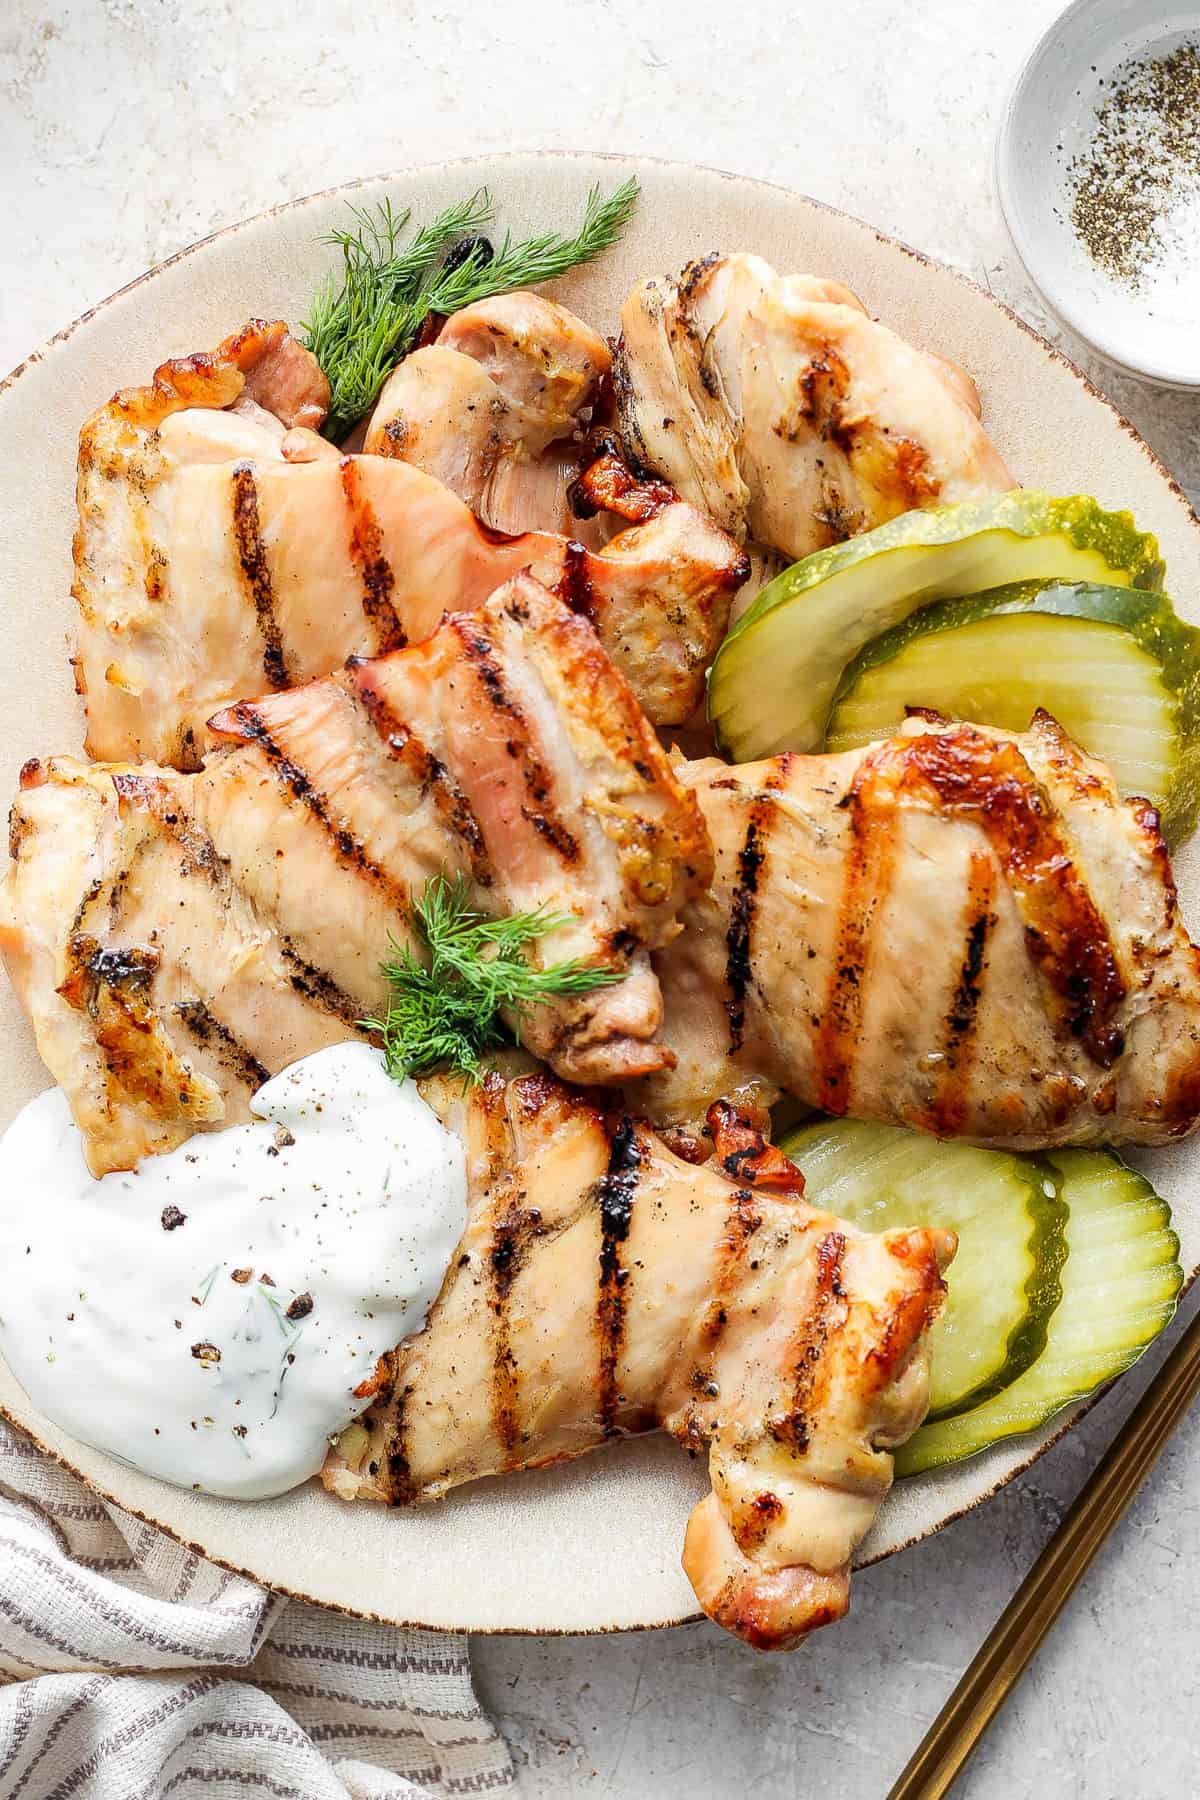 Grilled chicken breasts served with pickles and a dollop of sauce on a plate.